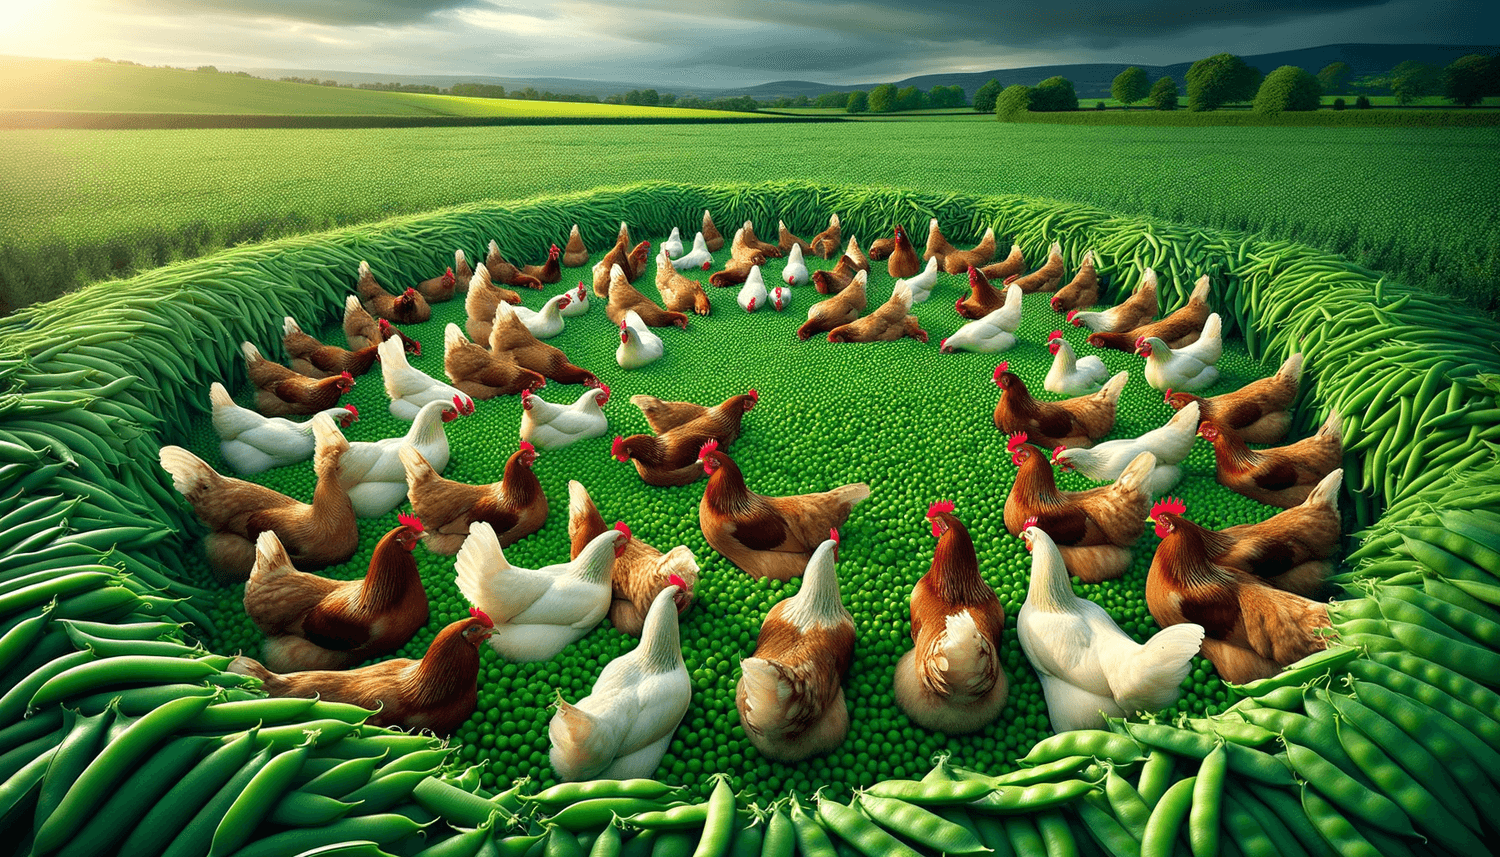 Can Chickens Eat Peas?